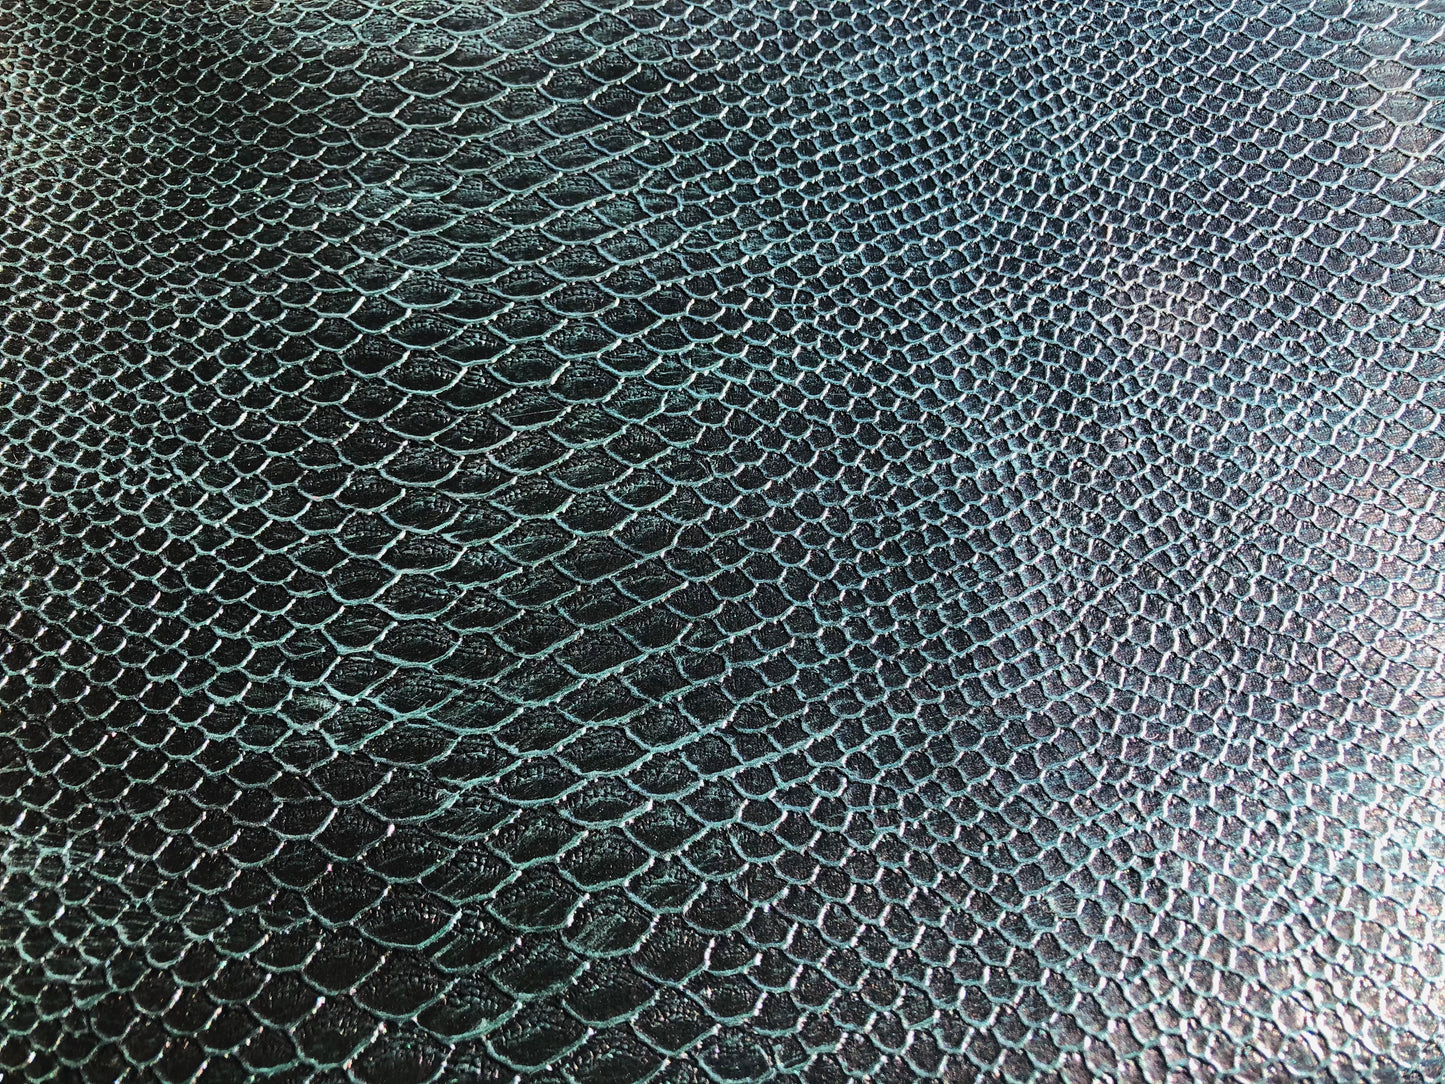 Mermaid scales Vinyl, embossed faux leather, synthetic leather, Vegan Pleather, artificial leather for bags, garments, and upholstery by the meter